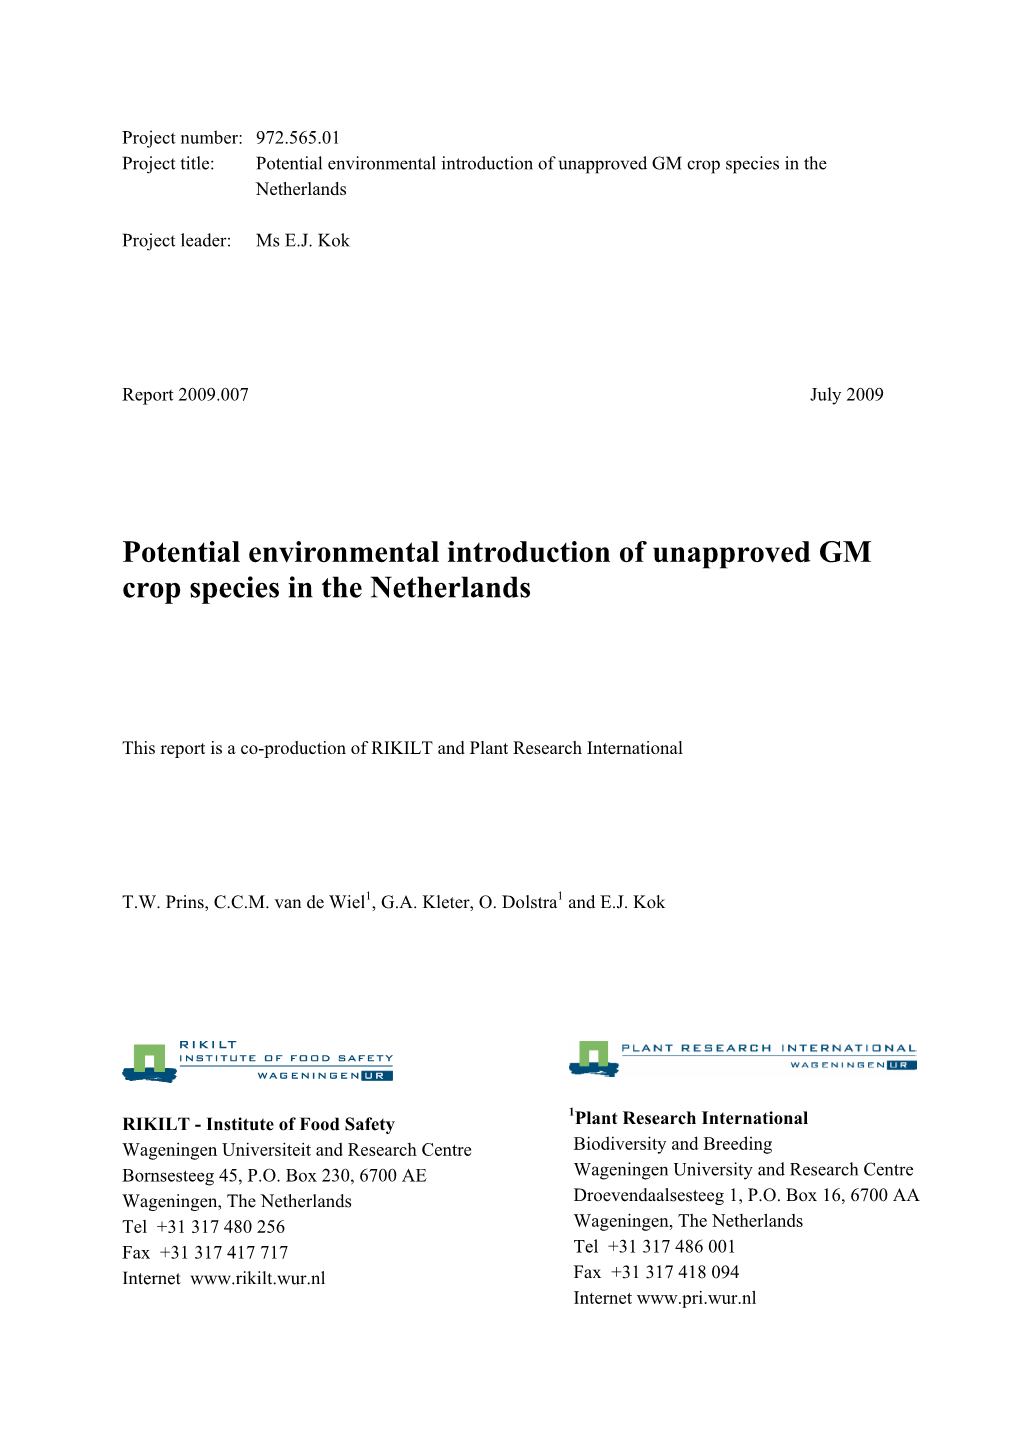 Potential Environmental Introduction of Unapproved GM Crop Species in the Netherlands